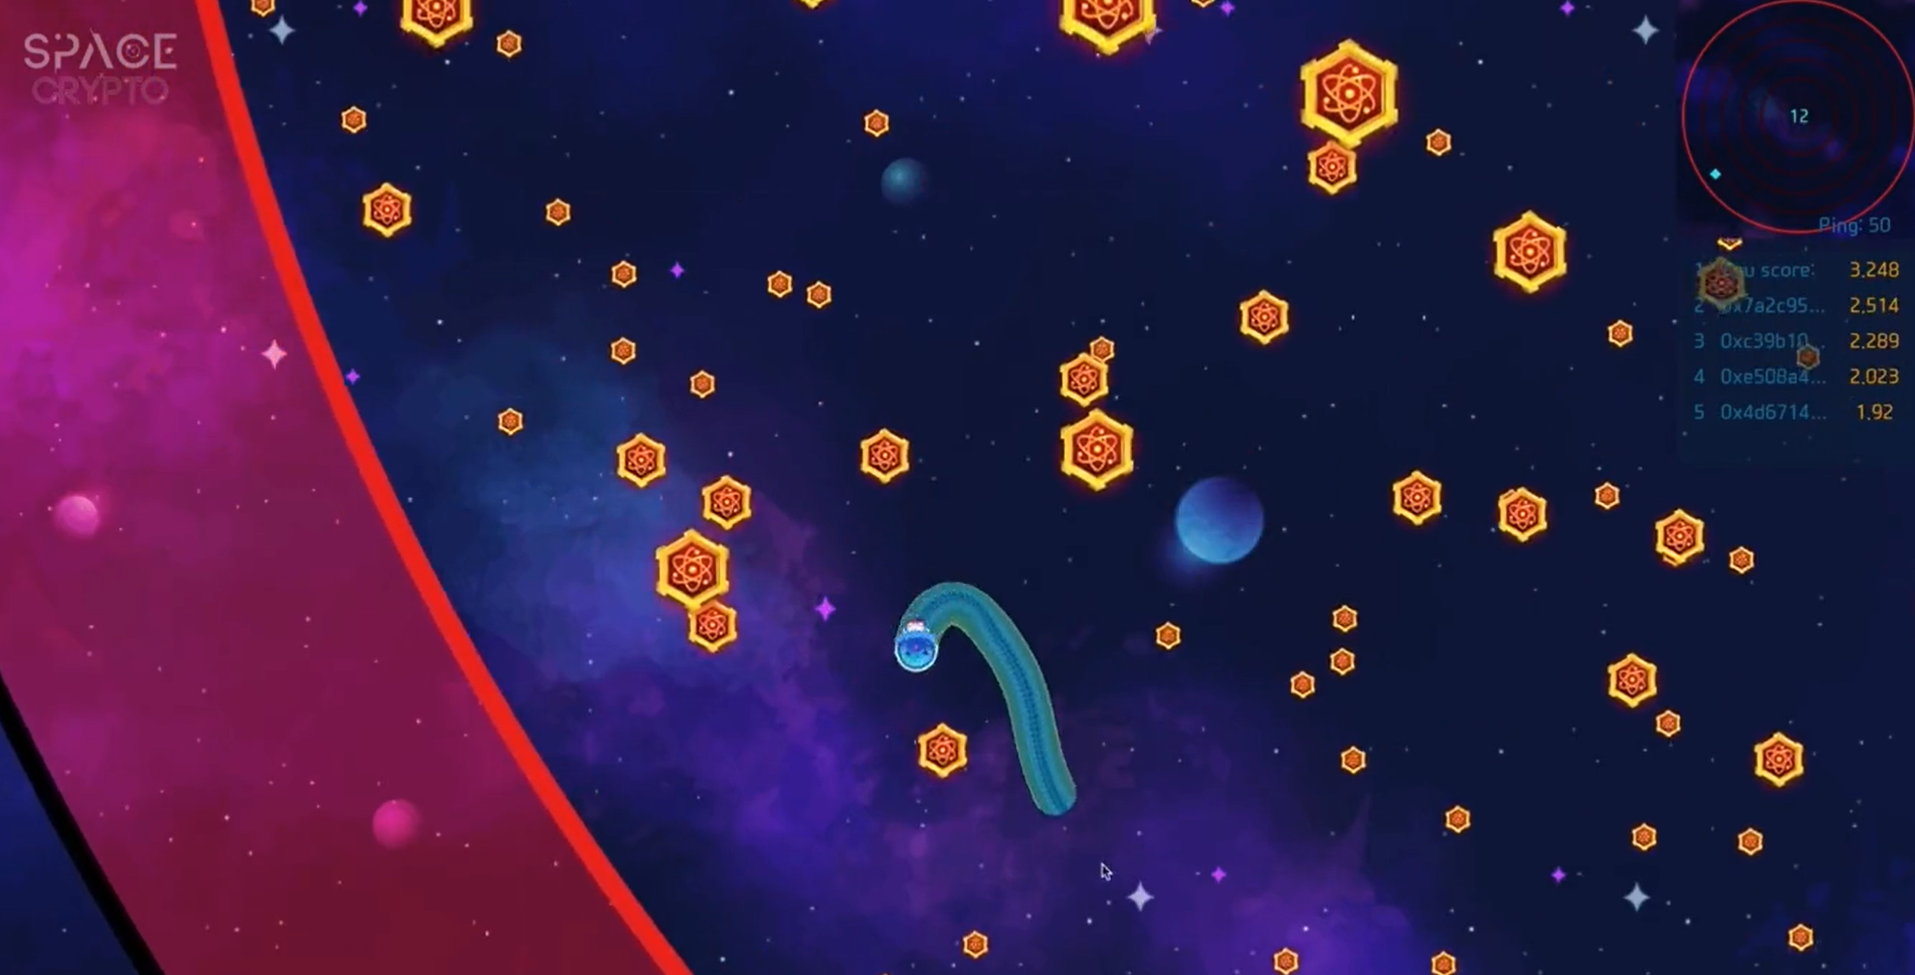 game image from Space Crypto